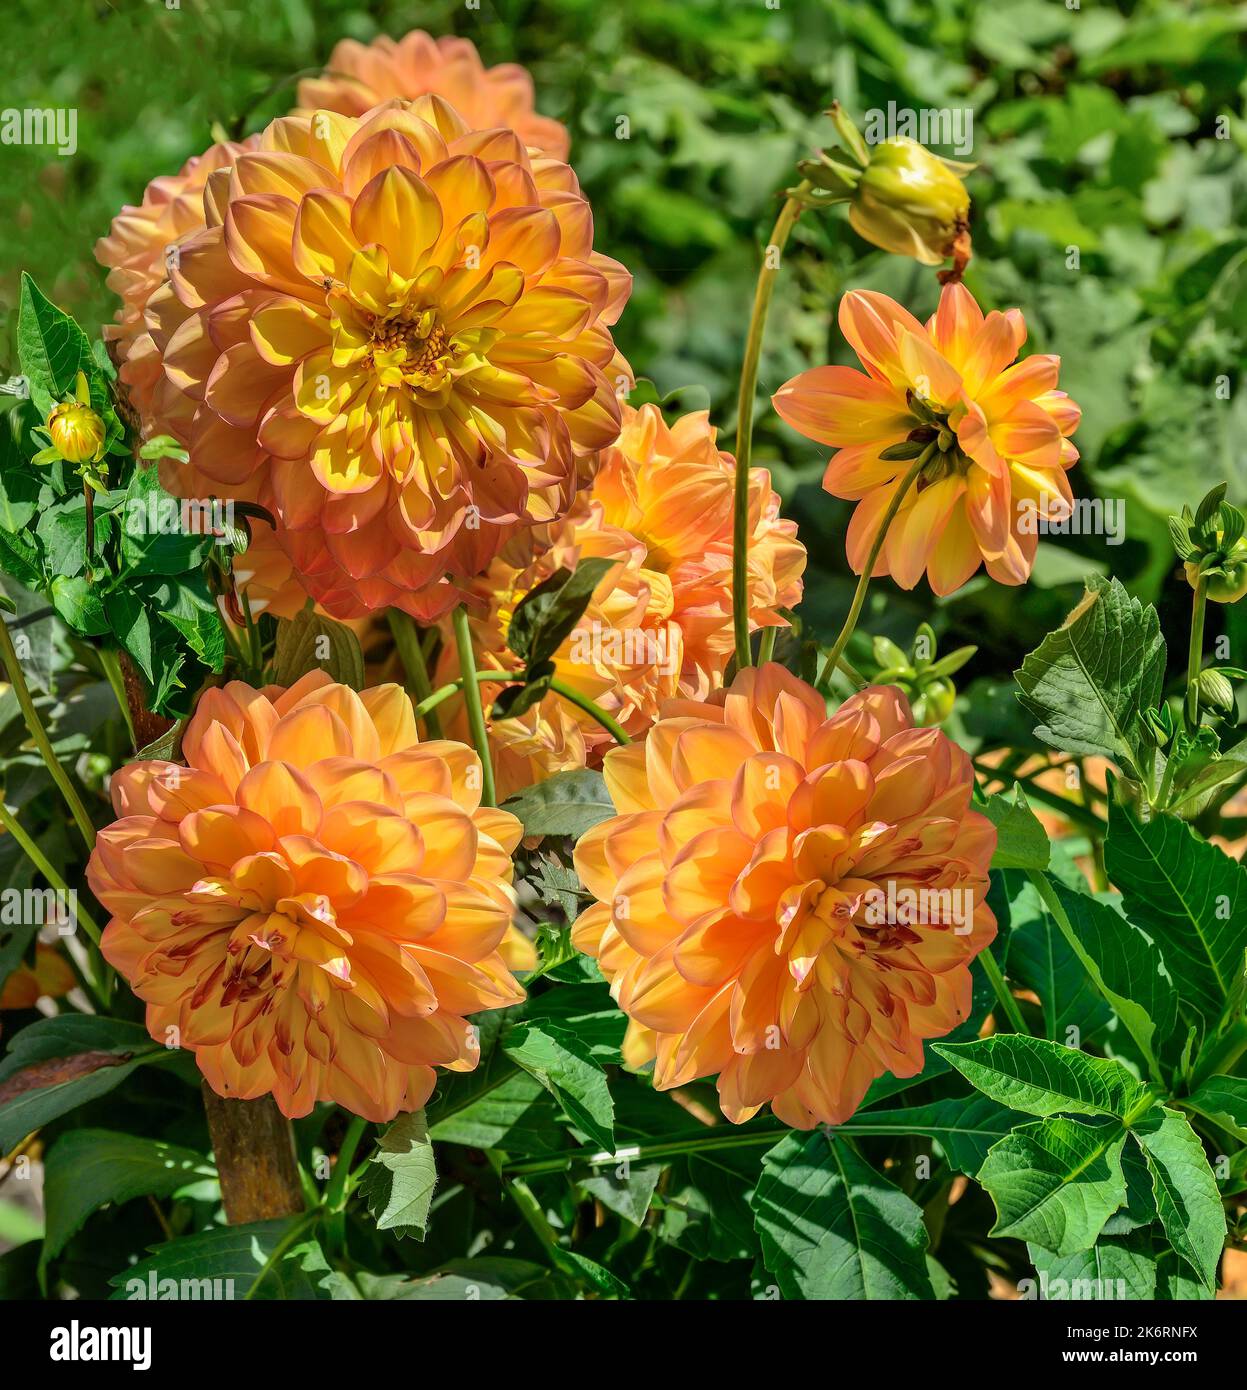 Bright golden dahlias heads variety Sunny Boy in garden. Beautiful yellow orange petals with red edges of double flowers. Globular dahlia flowers as s Stock Photo